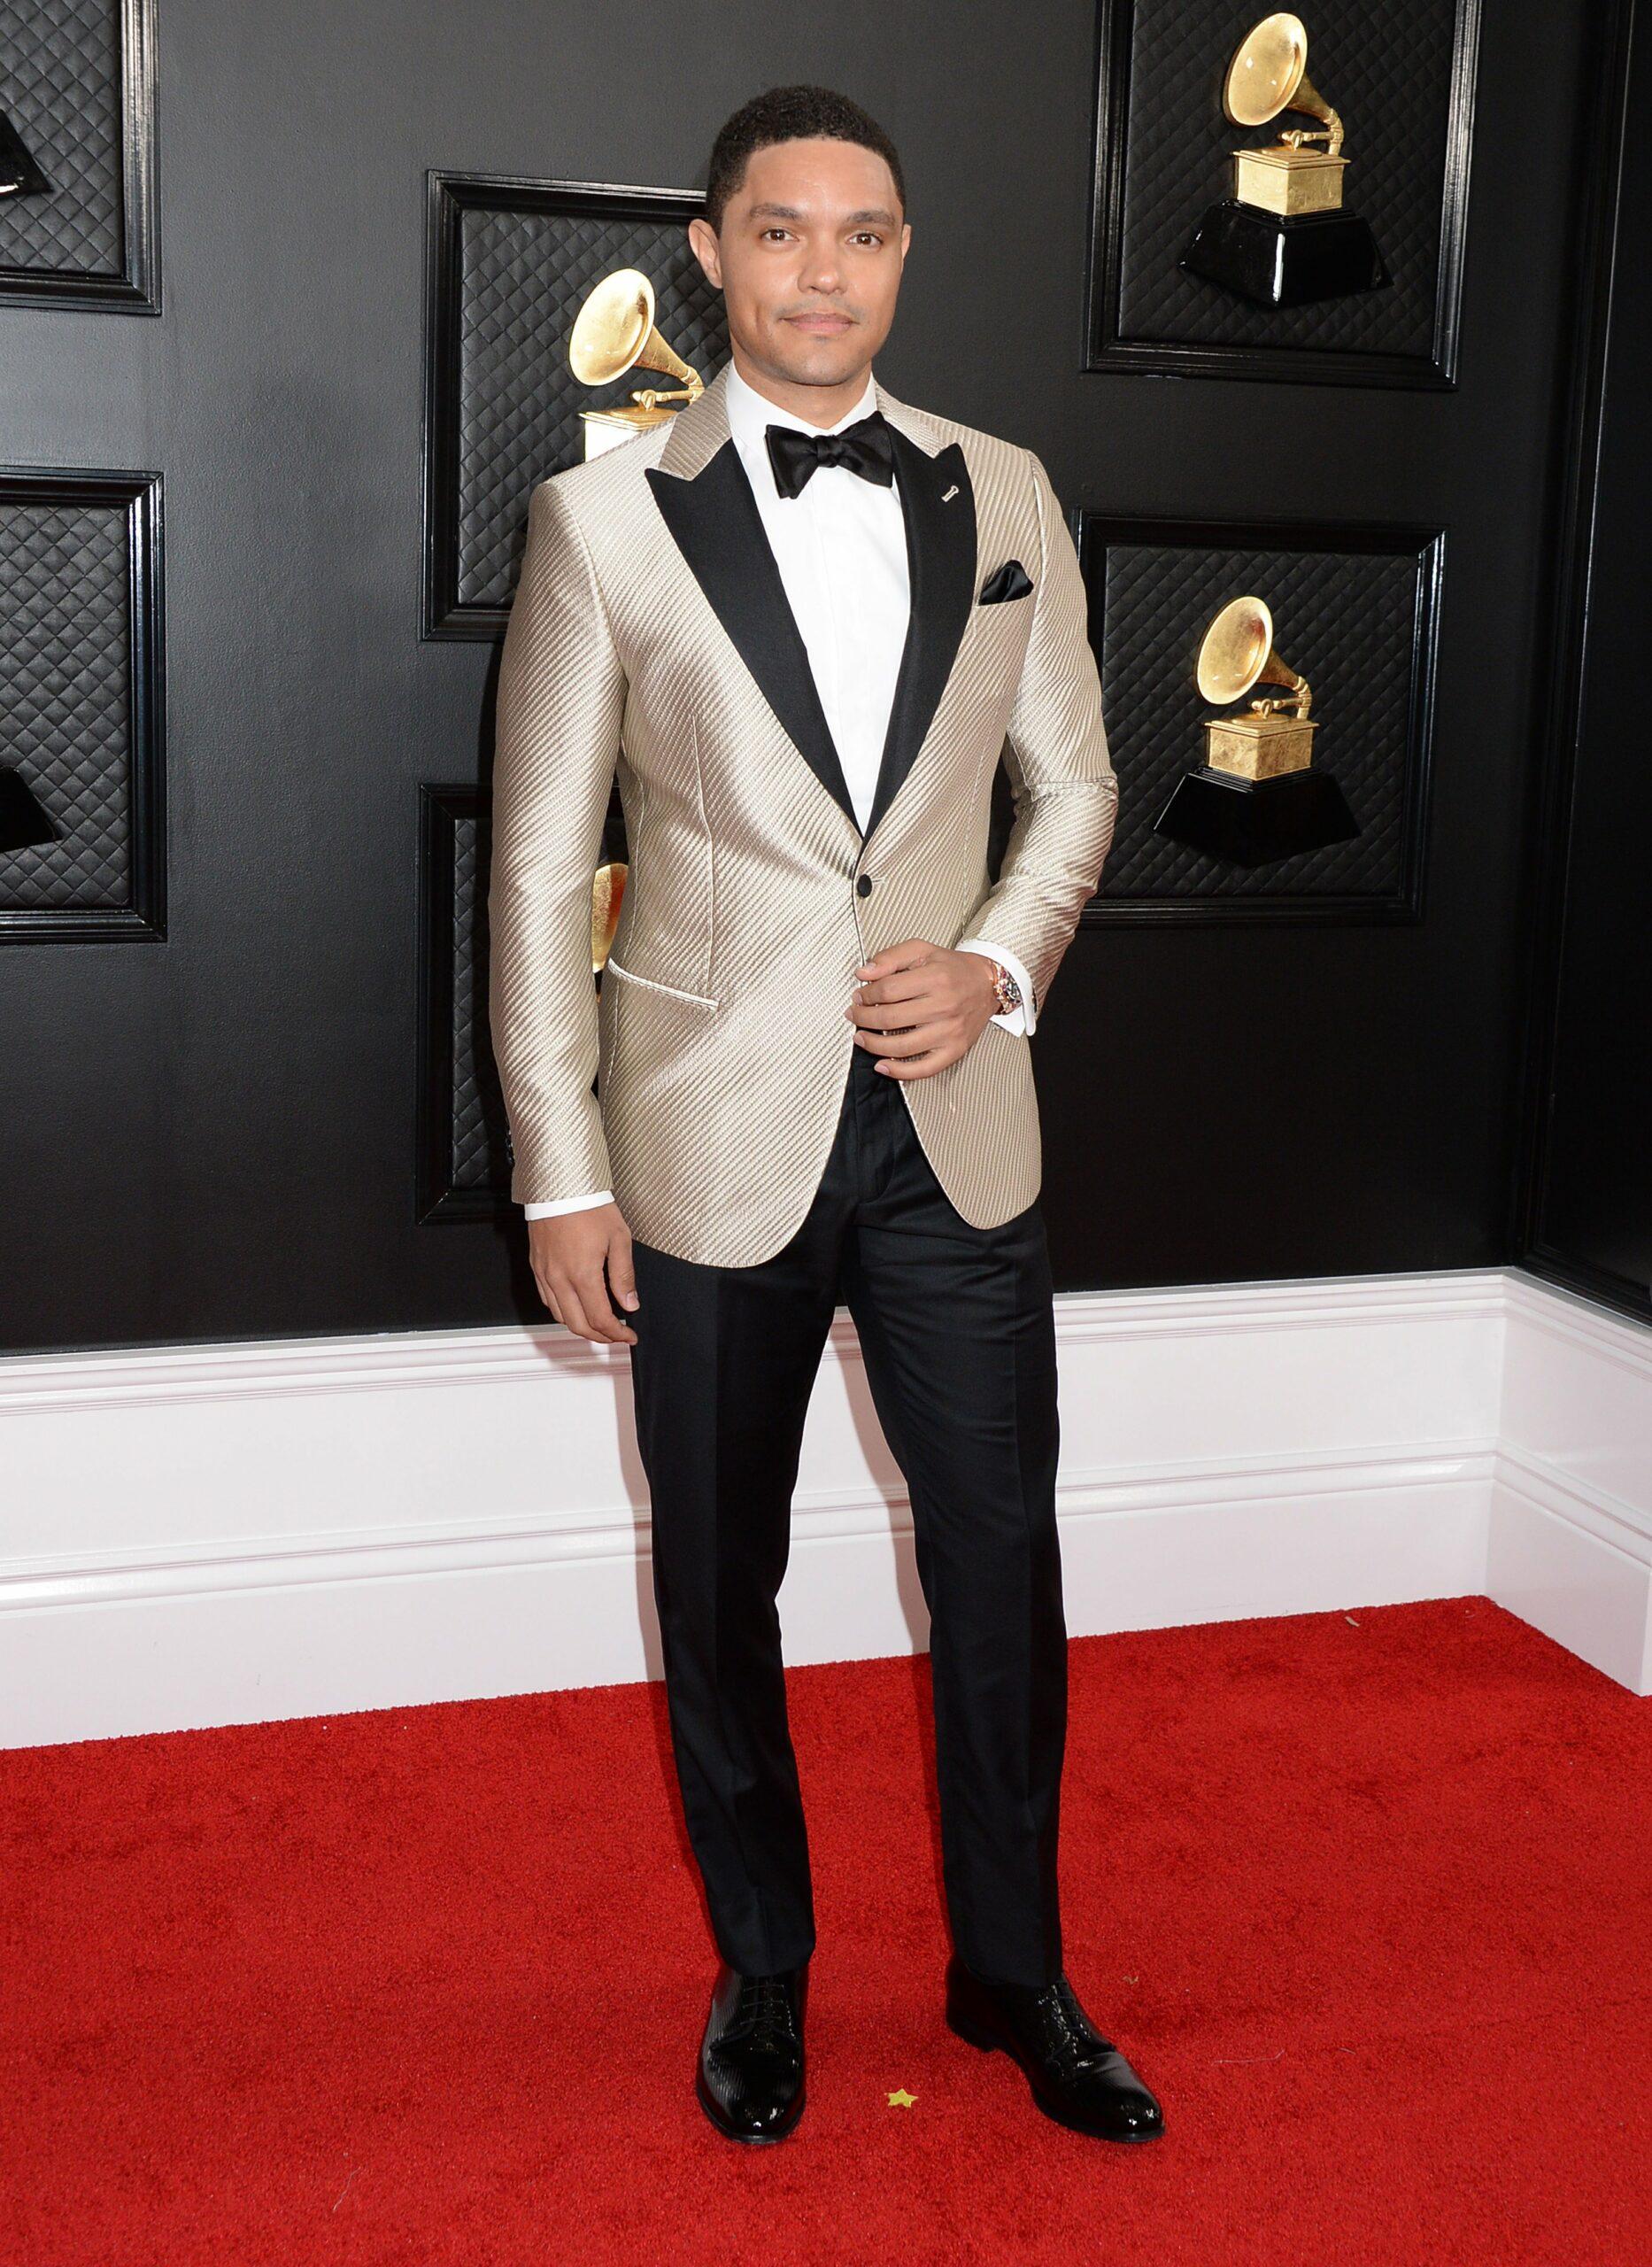 Trevor Noah appears at the 62nd Grammy Awards in a gold suit